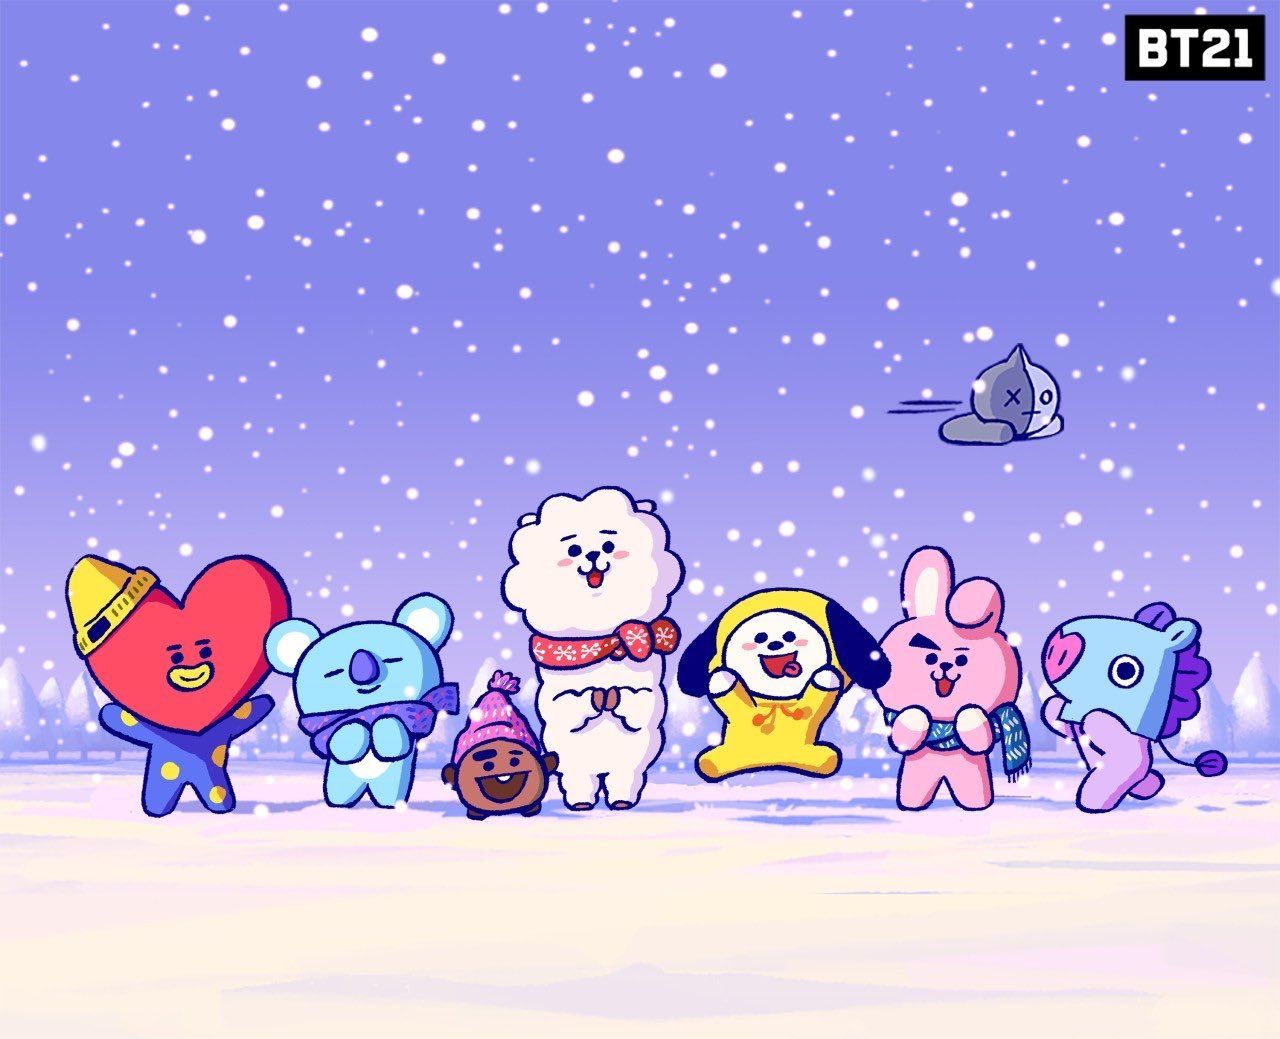 Bt21 Characters Wallpapers - Wallpaper Cave 353